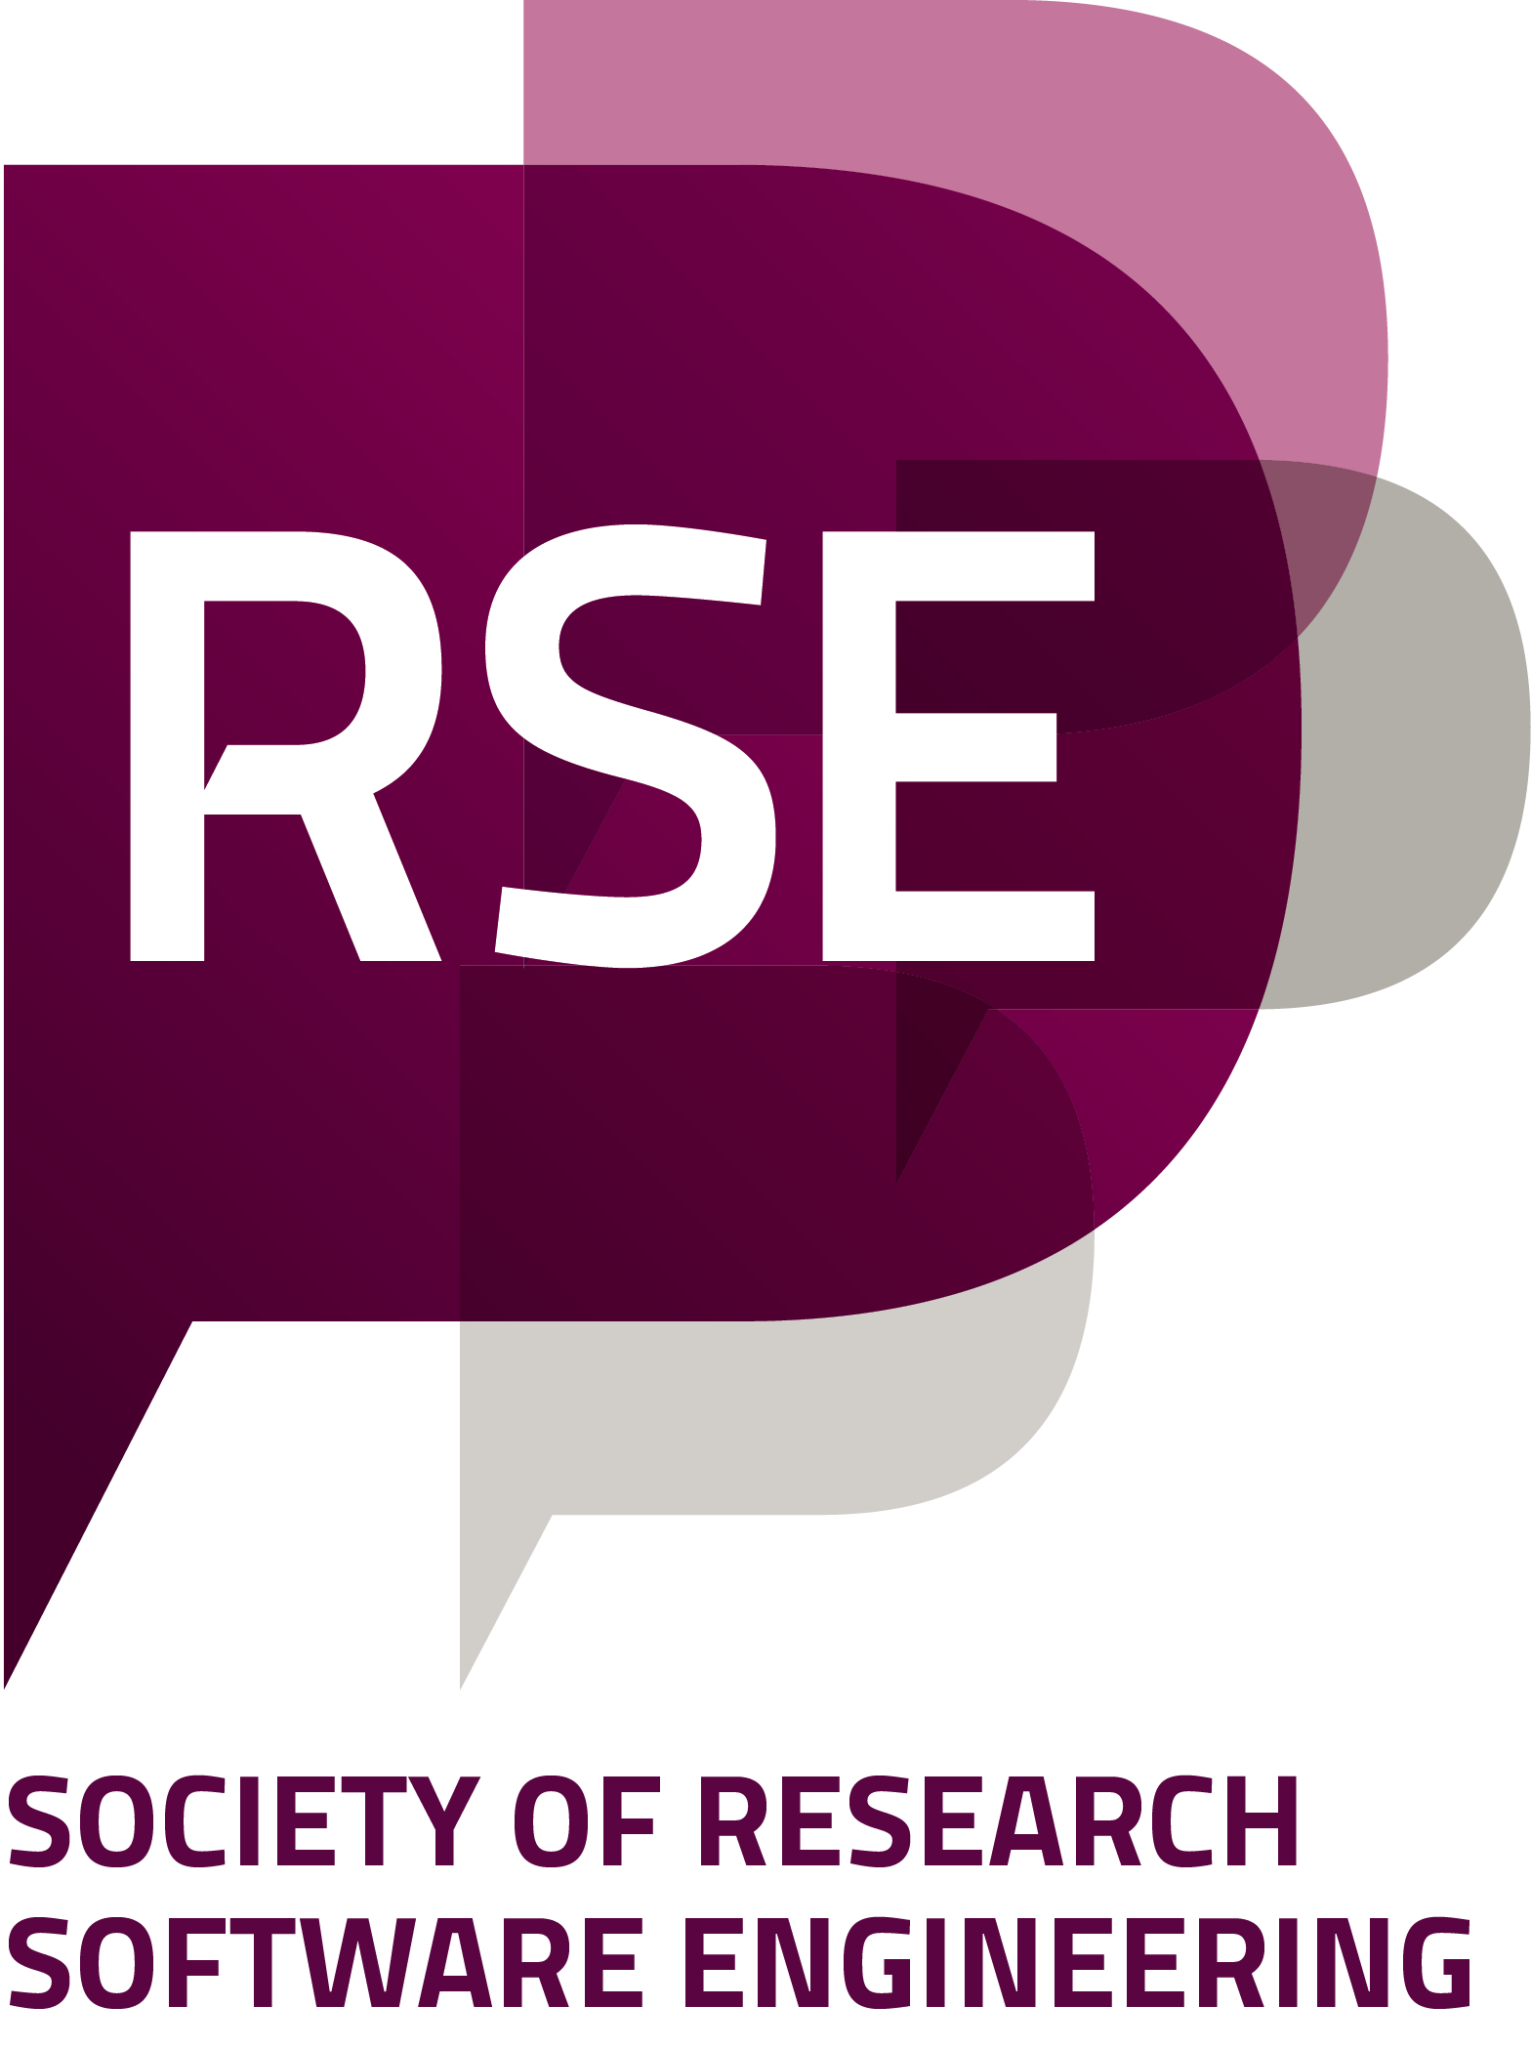 uk society of research software engineering